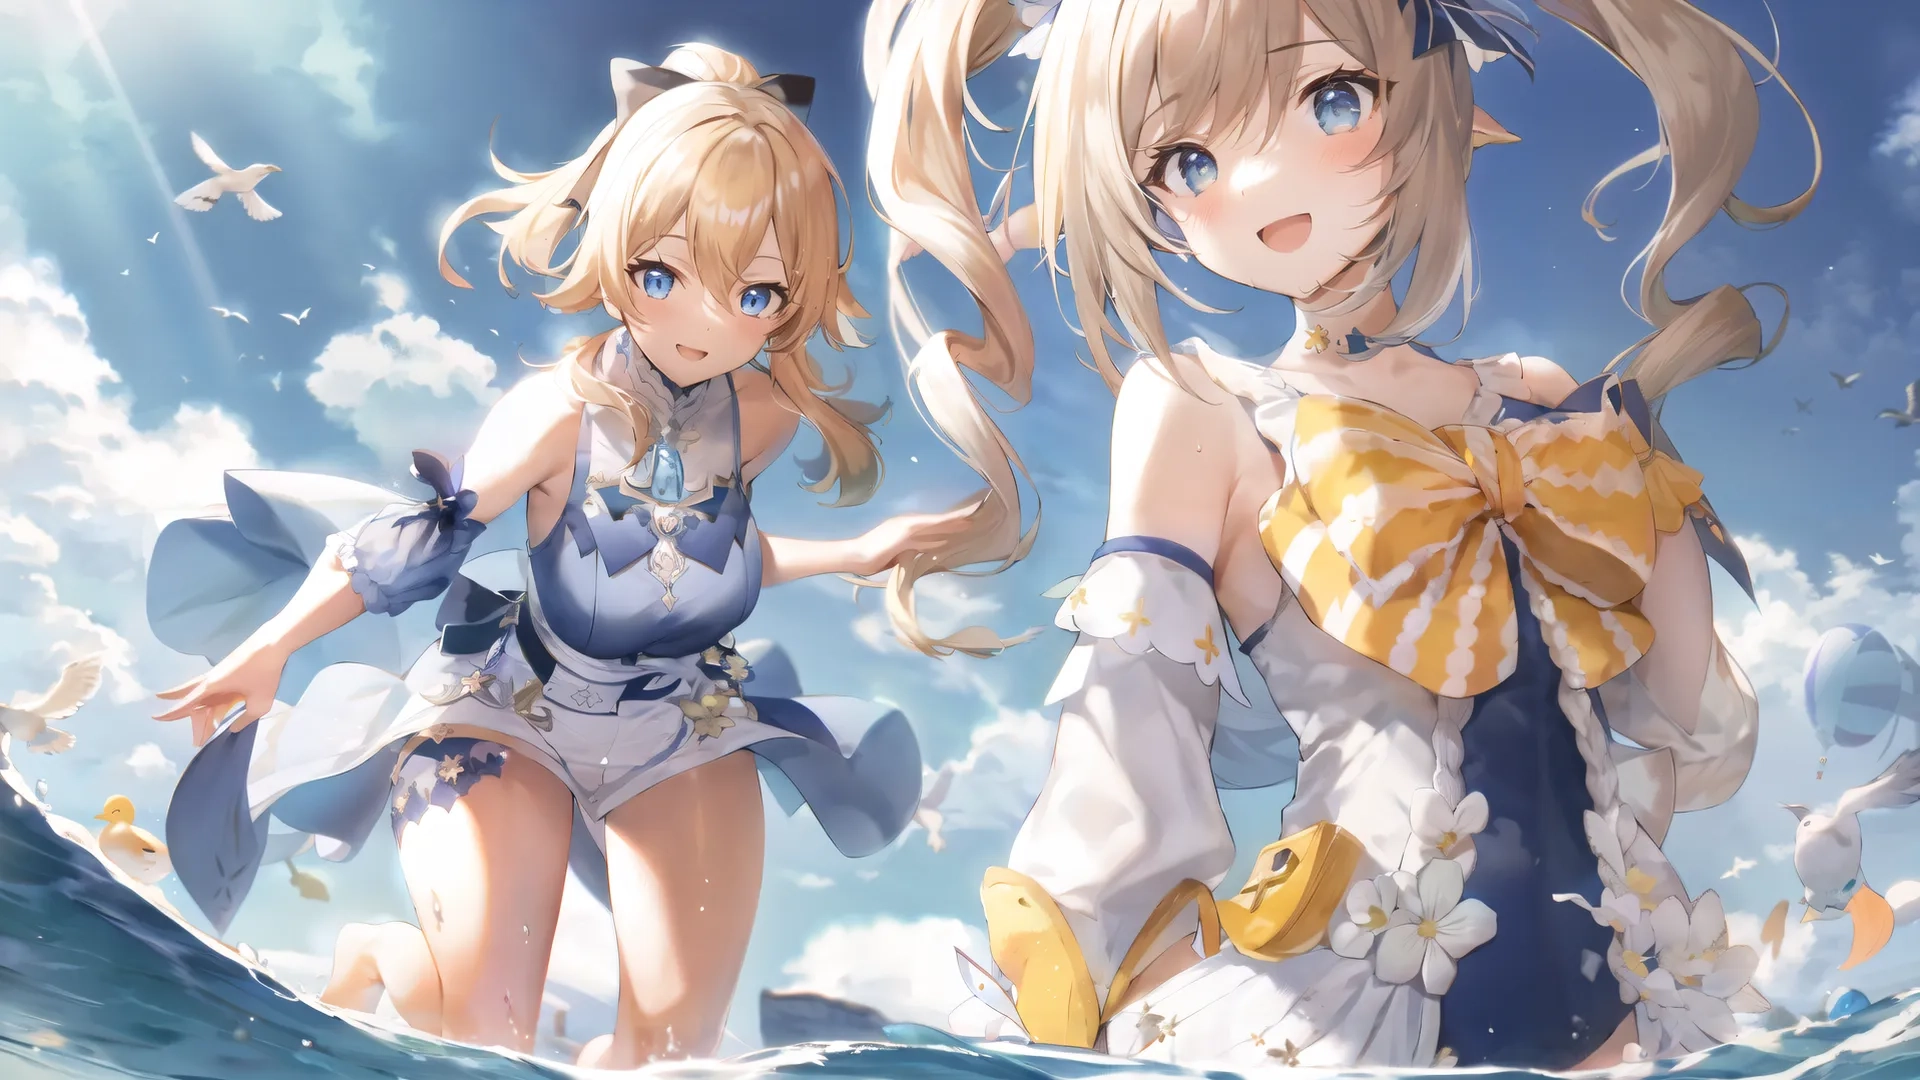 two anime - style girl standing on a beach together, facing towards the camera, holding their surfboards in the ocean waves from below
